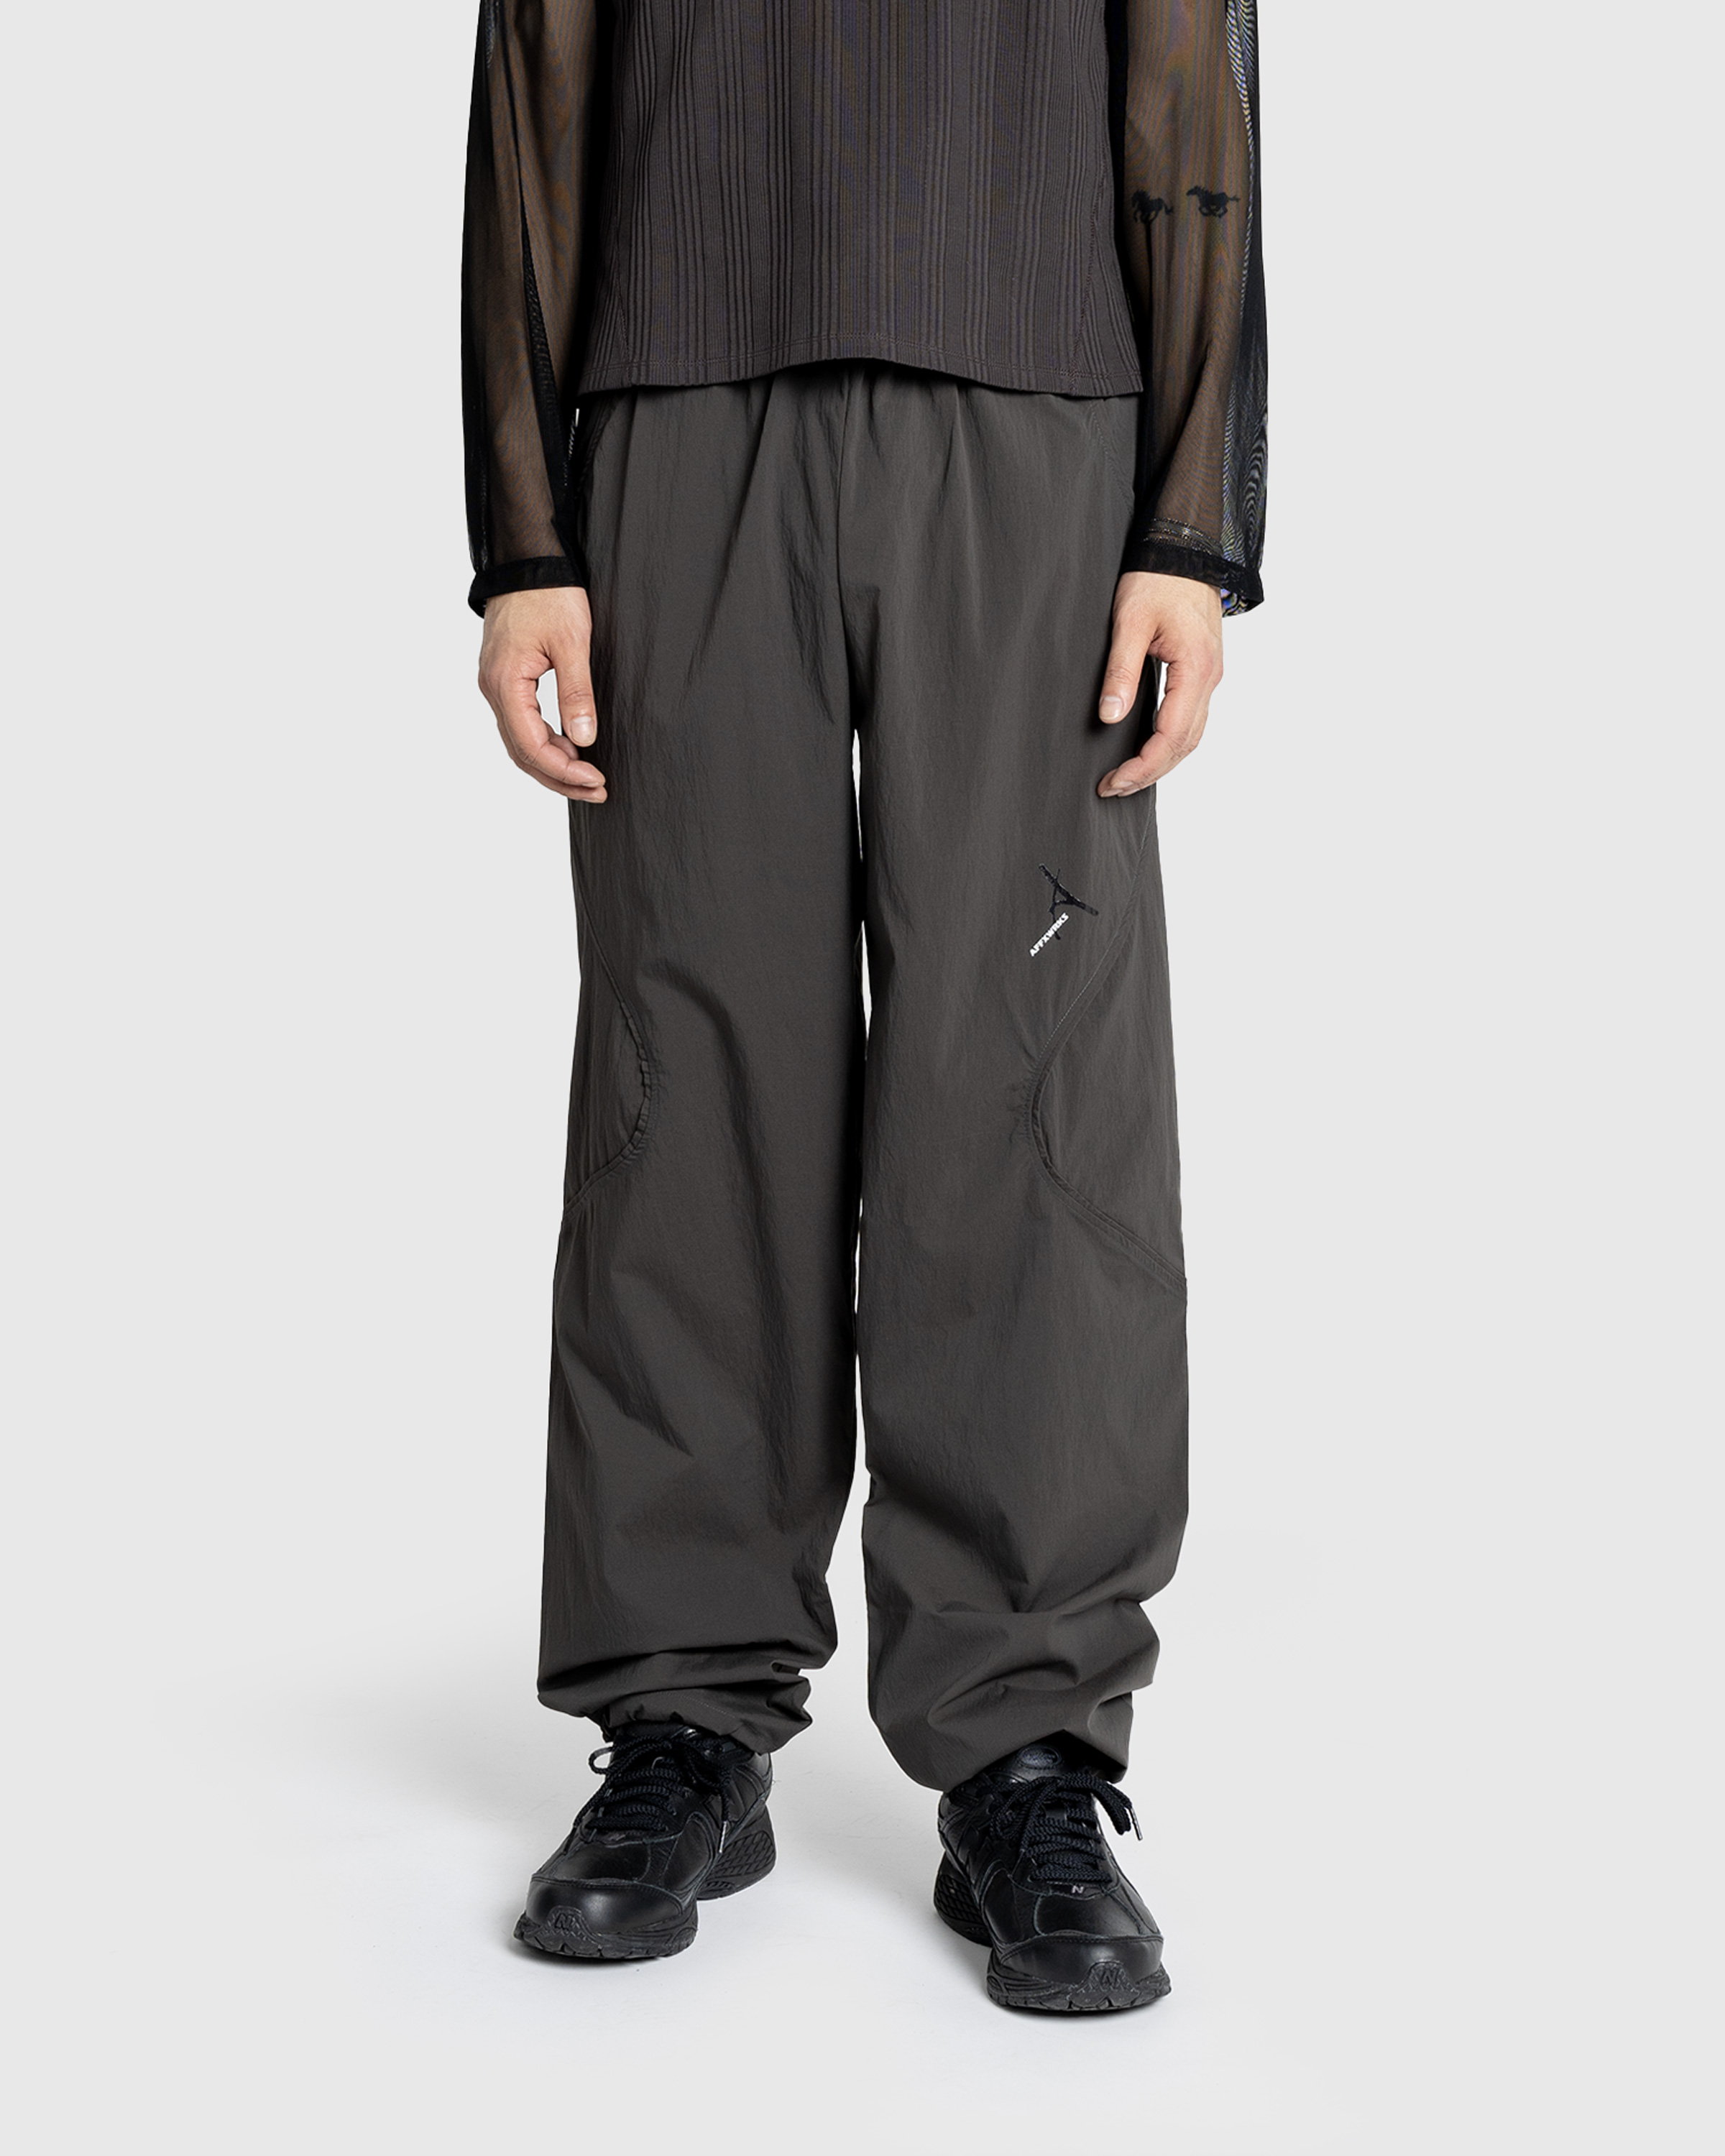 AFFXWRKS – Transit Pant Shale Brown - Trousers - Brown - Image 2